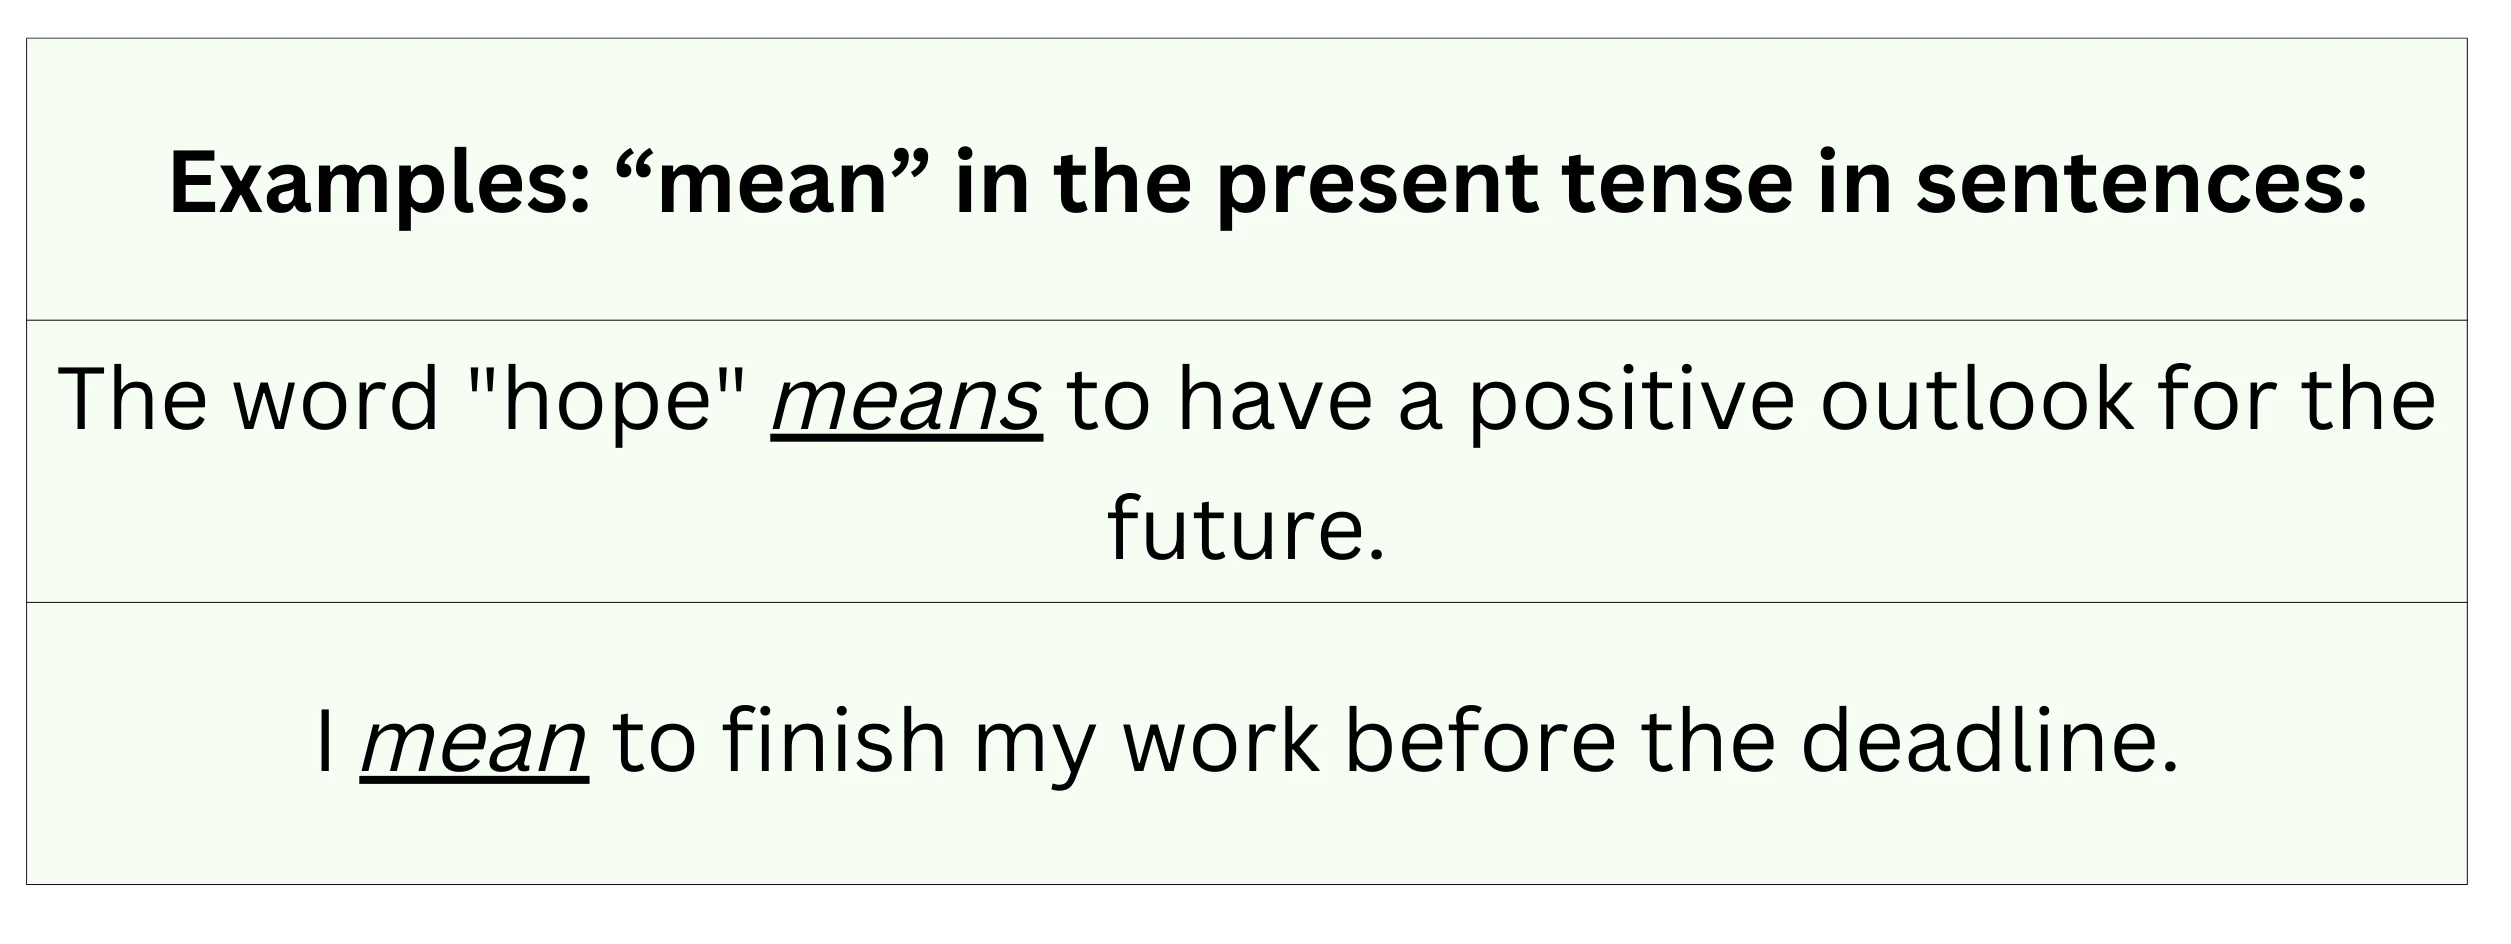 Examples of the word "mean" in sentences.